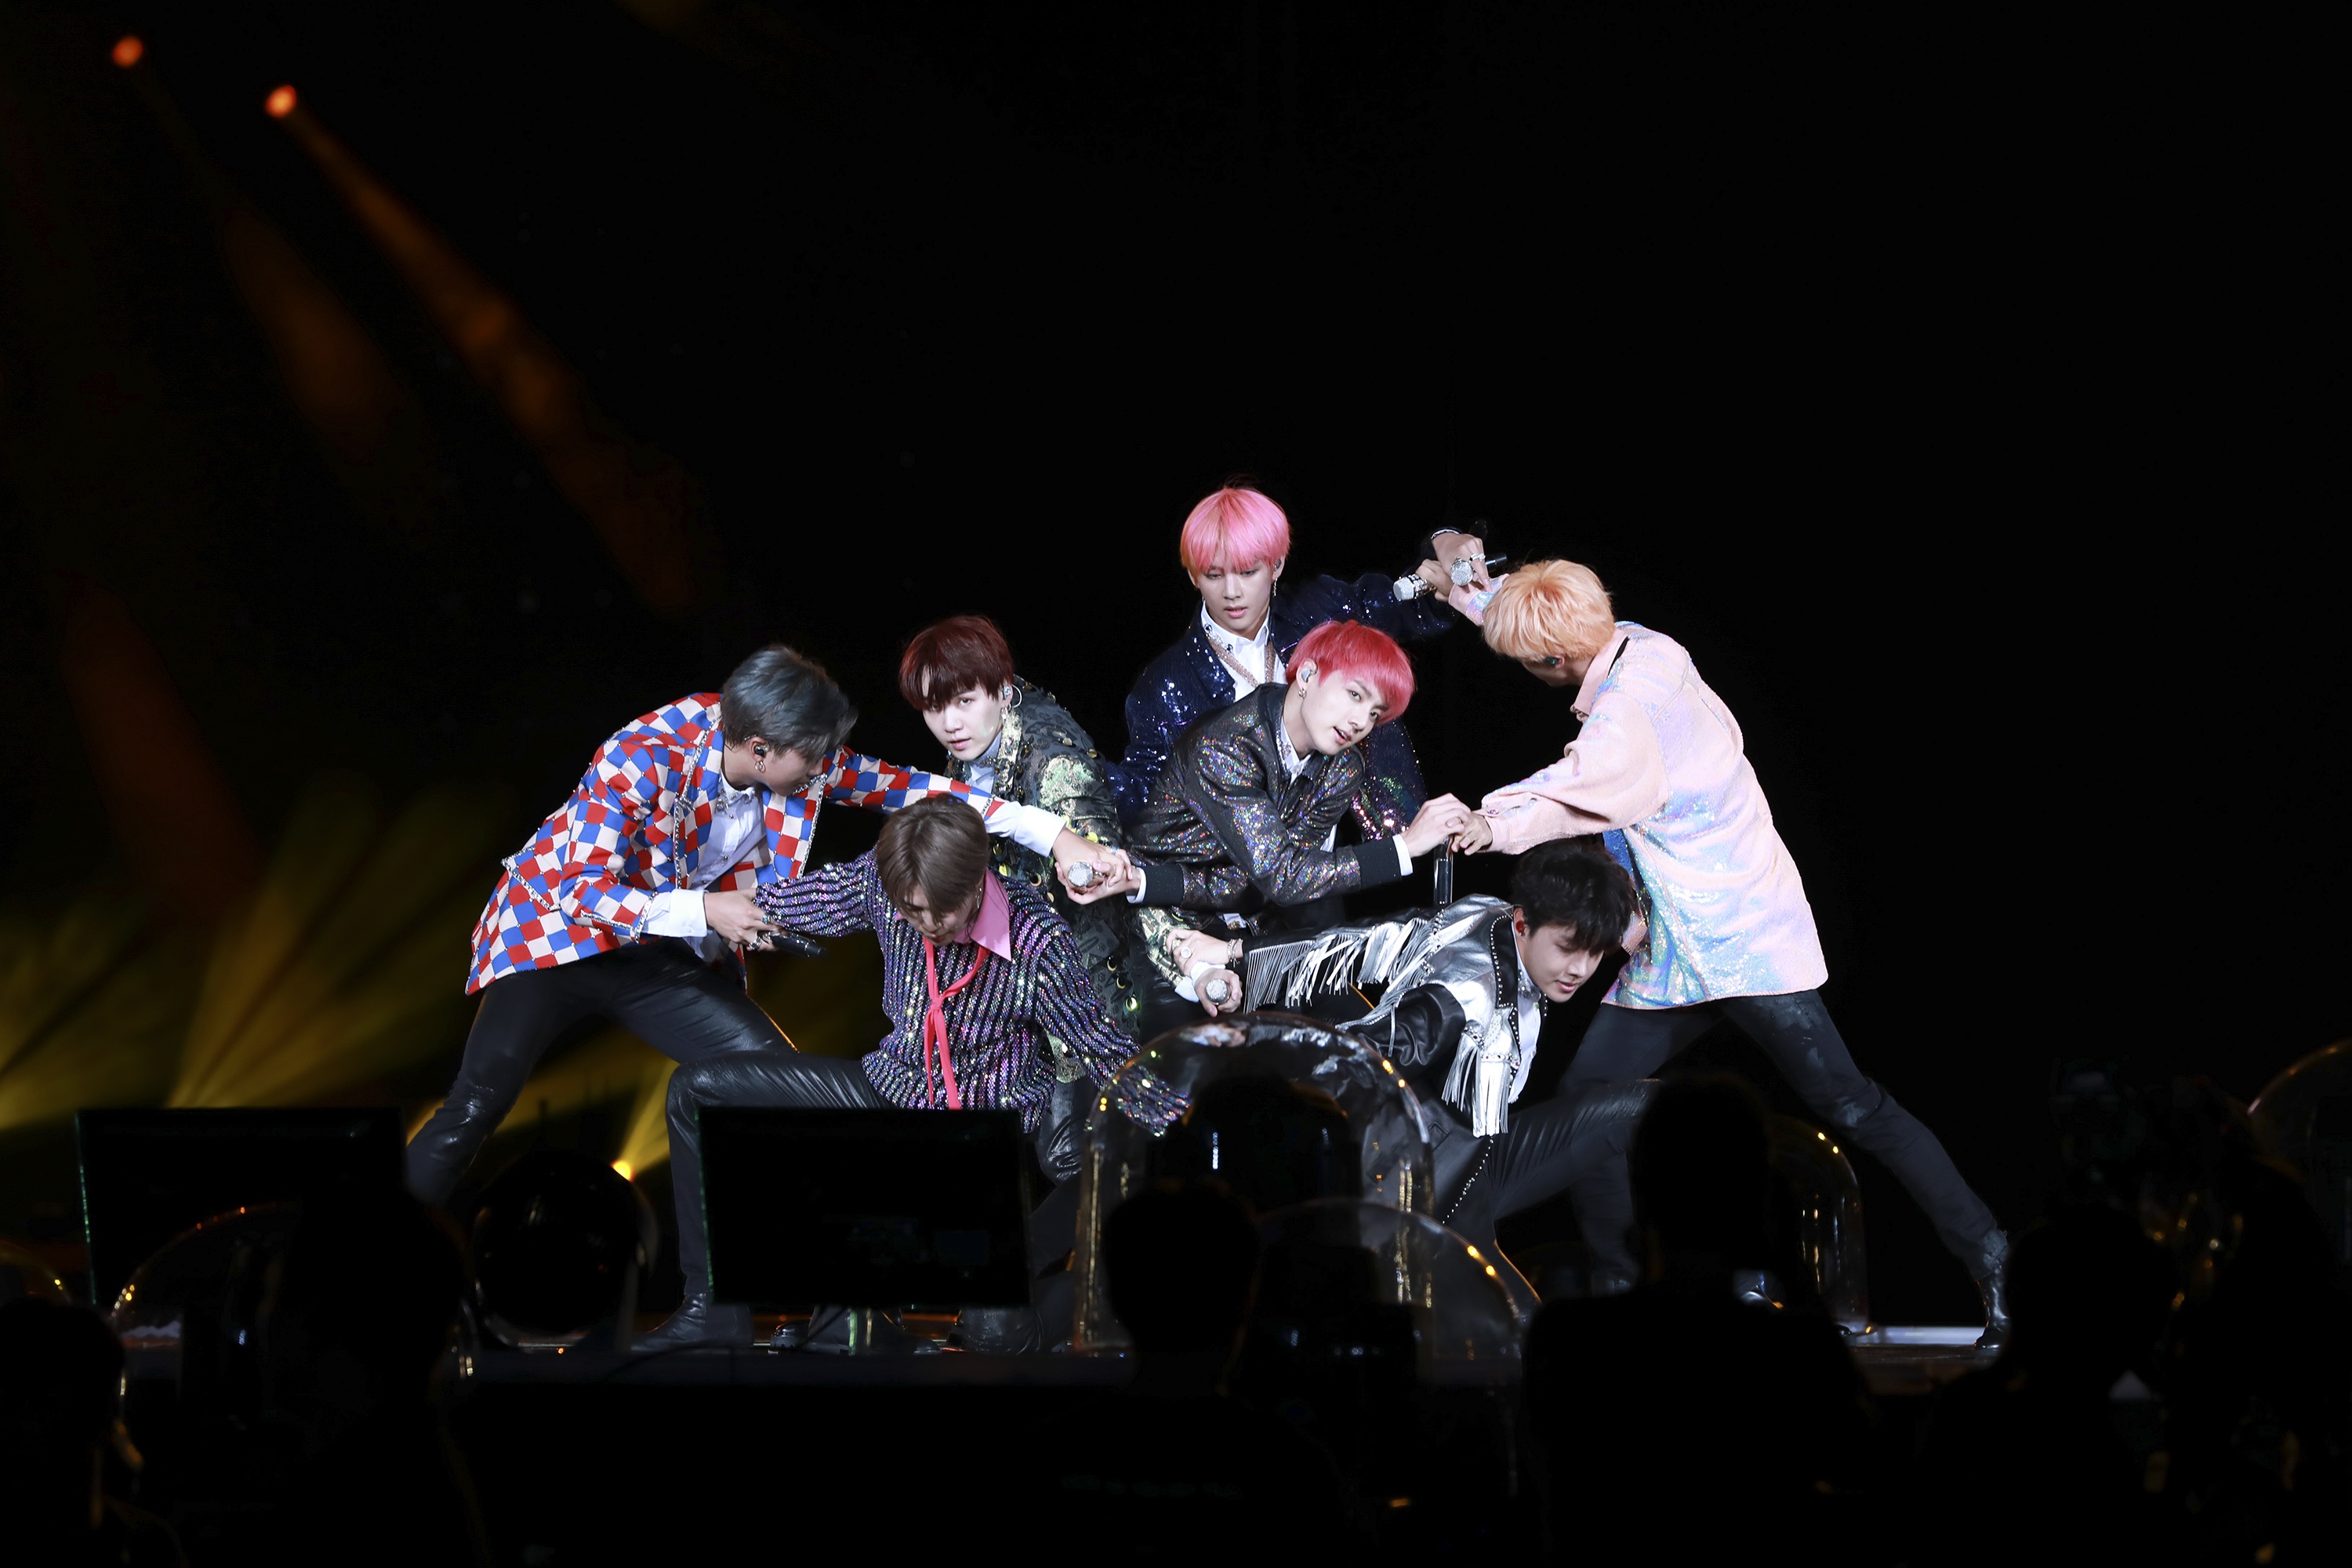 I think weve come to our own world, seeing you Ami (BTS fan club) who filled the vast venue. (RM)The concert of BTS was worth recalling in many ways: the first was to perform in the iconic venue of the Jamsil Olympic Main Stadium for the first time.As Suga said in the opening ceremony of Concert, it is a clear indication of their growth that they started at the 2,000-seat AX Hall and reached the main stadium of 45,000 seats.The main stadium was where only top singers such as Cho Yong-pil, Seo Tai-ji and H.O.T. BTS met 90,000 fans by performing here for two days.At the meeting, Suga said, I am proud to perform at the AT & T Stadium in the United States for the first time in Korea, and I do not feel real on the other hand. If I rehearse at AT & T Stadium, I will be ready as hard as we did before.We are the first to be solo concerts in Europe, and I am most curious about the reaction of the amigos who see the stage. We will prepare well with our unique energy. (B)It is an album that decorates YG Entertainments two and a half years of work, but I put down various burdens and prepared it with the desire to enjoy it with my fans.The festival is a long preparation period, but it seems like you have to enjoy it in a moment and then you have to leave garbage and clean it up.The good moments are momentary, and there are memories that remain like snapshots: Love Your Self thought it was festival after all, I wanted to say we should enjoy this short moment together.(RM)Its an album that captures the essence of the message that loving yourself is the beginning of love: this package album is literally festival.I worked with the idea that I wanted to enjoy rather than dwell on the record, so I think the title song Idol came out to fit the festival atmosphere. (Suga)BTS has set the concert opening stage with a new song, Idol (IDOL), which has been a thrilling festival since its inception.This song, which encourages the harmony of free movement and sword dance, is impressively added to the Korean element as it is called Chosun edition EDM.Also, Africa, Euro - Asian cultural elements are mixed. Idol is a song with a message that I am myself and I love myself even if someone else says something.In the Africa rhythm, Korean traditional music such as Earsu, Jihwaja, and Kungdererer were put into the rhythm, and EDM was combined with it, resulting in Korean and global music.I cant tell you about performance, but Africa dance is mixed with Korean dance; Samulnori and mask dance are combined to make it easy to follow. (Jay Hop)On this day, the stage of the new songs on the new album and the individual stage of the members were the points of observation.The choreography of the bü, which seemed to rise up from the collapse of the members The Crow: Salvation on the stage of the new song Im Fine (Impine), conveyed the songs message touchingly.At the meeting, RM explained the song and said, If you look at the lyrics, you say it is not okay, but it is okay. It is a song that says that the misfortune of life will be repeated, but it is okay. It was a time to deeply see the charm of the members on the solo stage.Jay Hop, who first appeared in a white suit, featured all three songs, rap and dance with Trivia (gi): Just Dance.Jungkook then sang Euphoria and gave a live live performance to passionate dance.Jimin sang Serendipity as a solo song, creating a dreamy atmosphere and revealing Jimins charm without filtering.RM showed intense rappang with Trivia (win): Love, while Vue showed Singularity with an overwhelming facial expression.Suga overturned the expectation of raping and played the song heavily through Trivia (formerly): Seesaw, and Jean mournfully sang Epiphany with piano playing.They showed various set lists such as Magic Shop, I Need You, Airplane Pt.2, I can not tell, DNA, Fake Love and MIC Drop.I told people to do Love Your Self for two and a half years, but I could not do it.I think I have a lot of thoughts to myself about what I am doing so hard for, I have a lot of insults to myself and a lot of strange thoughts.I just thought, Im being so hard on me. In the future, I thought I should trust me more and trust my members and think good things. (Jimin)If this concert is the last meaning, it can be said that BTS growth.Suga said, We started from a young child, he said. What we pursued was about the growth of humans and people.It was a world view that YG Entertainment had been before its debut and it is expanding. I have been doing a lot of tours and my teamwork has improved a lot, said Bue. I was impressed by the fact that Suga and RM were trying to support me as safely as possible until I was on the floor while I was preparing Im fine.At the meeting, they also answered questions about the next album plan and renewal with their agency.Suga said, We have to start a new YG Entertainment from now on. We all think that the topic we think is the subject of the next series.Asked about the contract with his agency Big Hit, Jin said, I have a lot of talk with the members and I continue to talk with the company, but I will probably be able to tell you good news soon.Another question was asked about the analysis that the global popularity factor of BTS is SNS.Suga said, I think it is definitely wrong. I am focused on music, performance and messages that BTS thinks are important, so many people love it and I think it is a seed.Youll have looked up SNS after that, replied RM, who also said: All members love music and performance, element and consistency are our secret to popularity.Today, the precipitation rate was over 80%, but it didnt rain at all during the performance. It seems like heaven is helping.Im going to show you, Ami, to play guitar, play the piano... and thank you for your various experiences. (Jin)I tried a lot to eat red ginseng, propolis, sleep hard, and show you the stage in the best condition.It wasnt a satisfying performance for me, I thought I could do better, but I didnt think I could grow more.I will show you that I have grown up in the next Concert by doing twice as hard as I am now. (Jungkook)When did BTS come to this place? , You came to a really high place. Its so good to be able to show our songs and performances here and this moment is so happy, you see, you also love your self!(Jay Hop)BTS World Tour, Seoul Concert